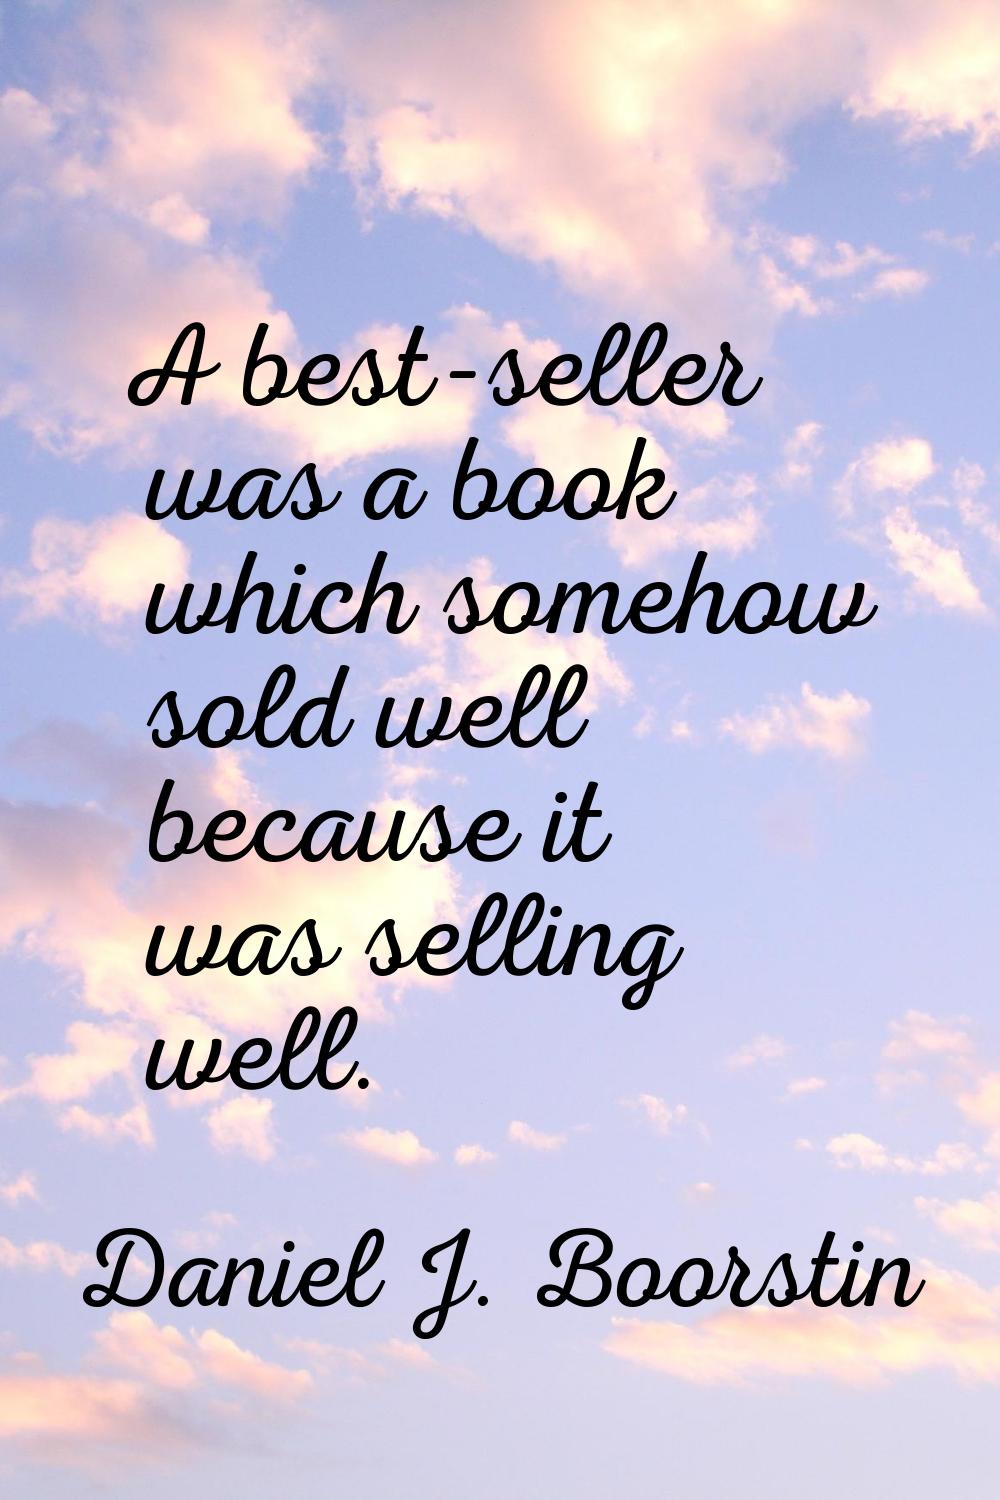 A best-seller was a book which somehow sold well because it was selling well.